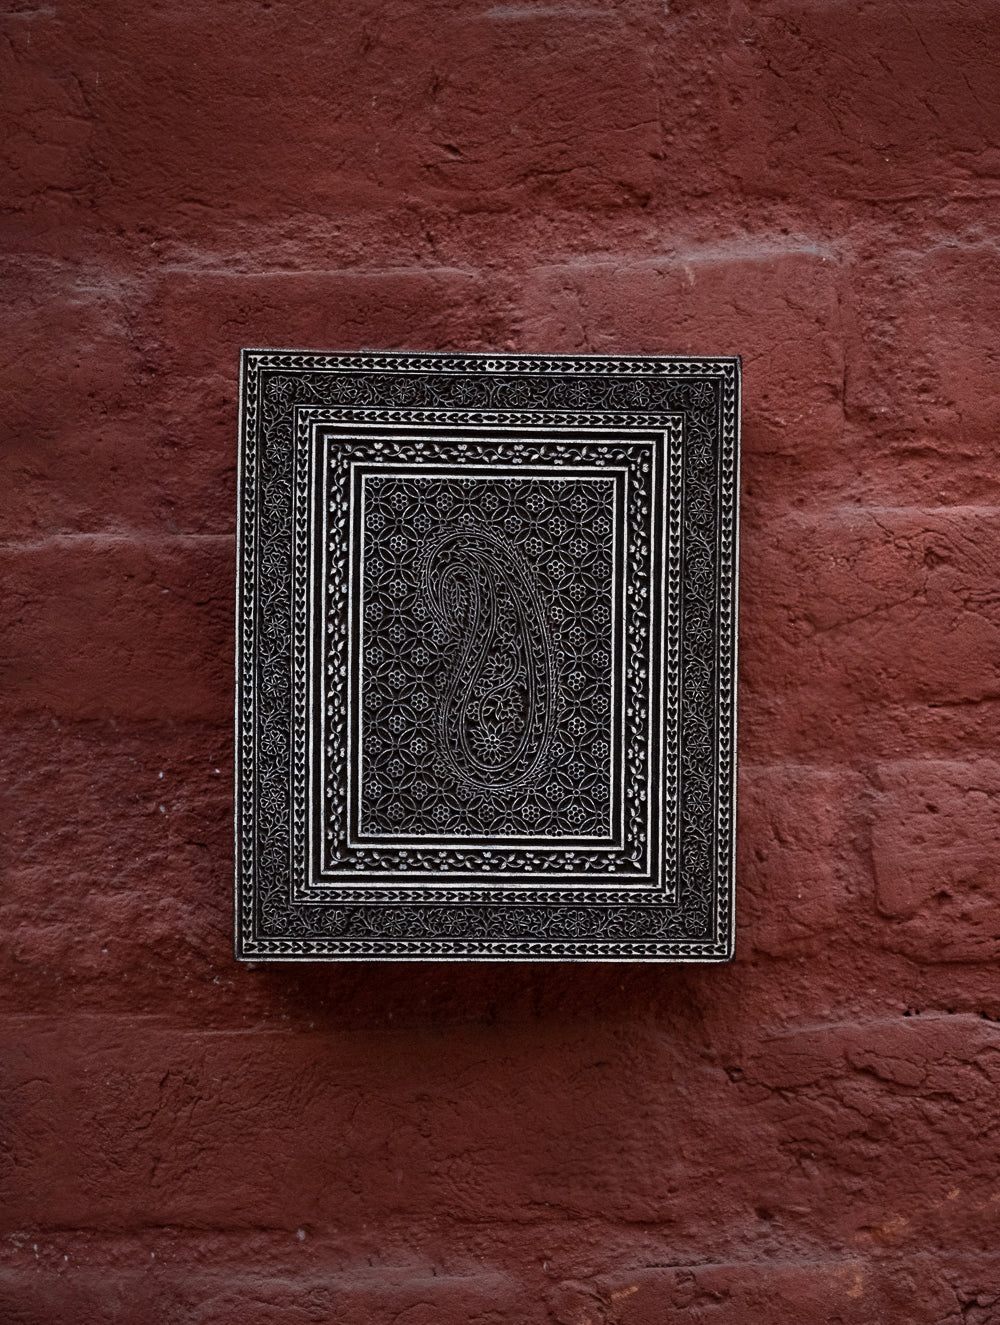 Load image into Gallery viewer, Nazakat. Exclusive, Fine Hand Engraved Wood Block Curio / Wall Piece - Paisley, Rectangular